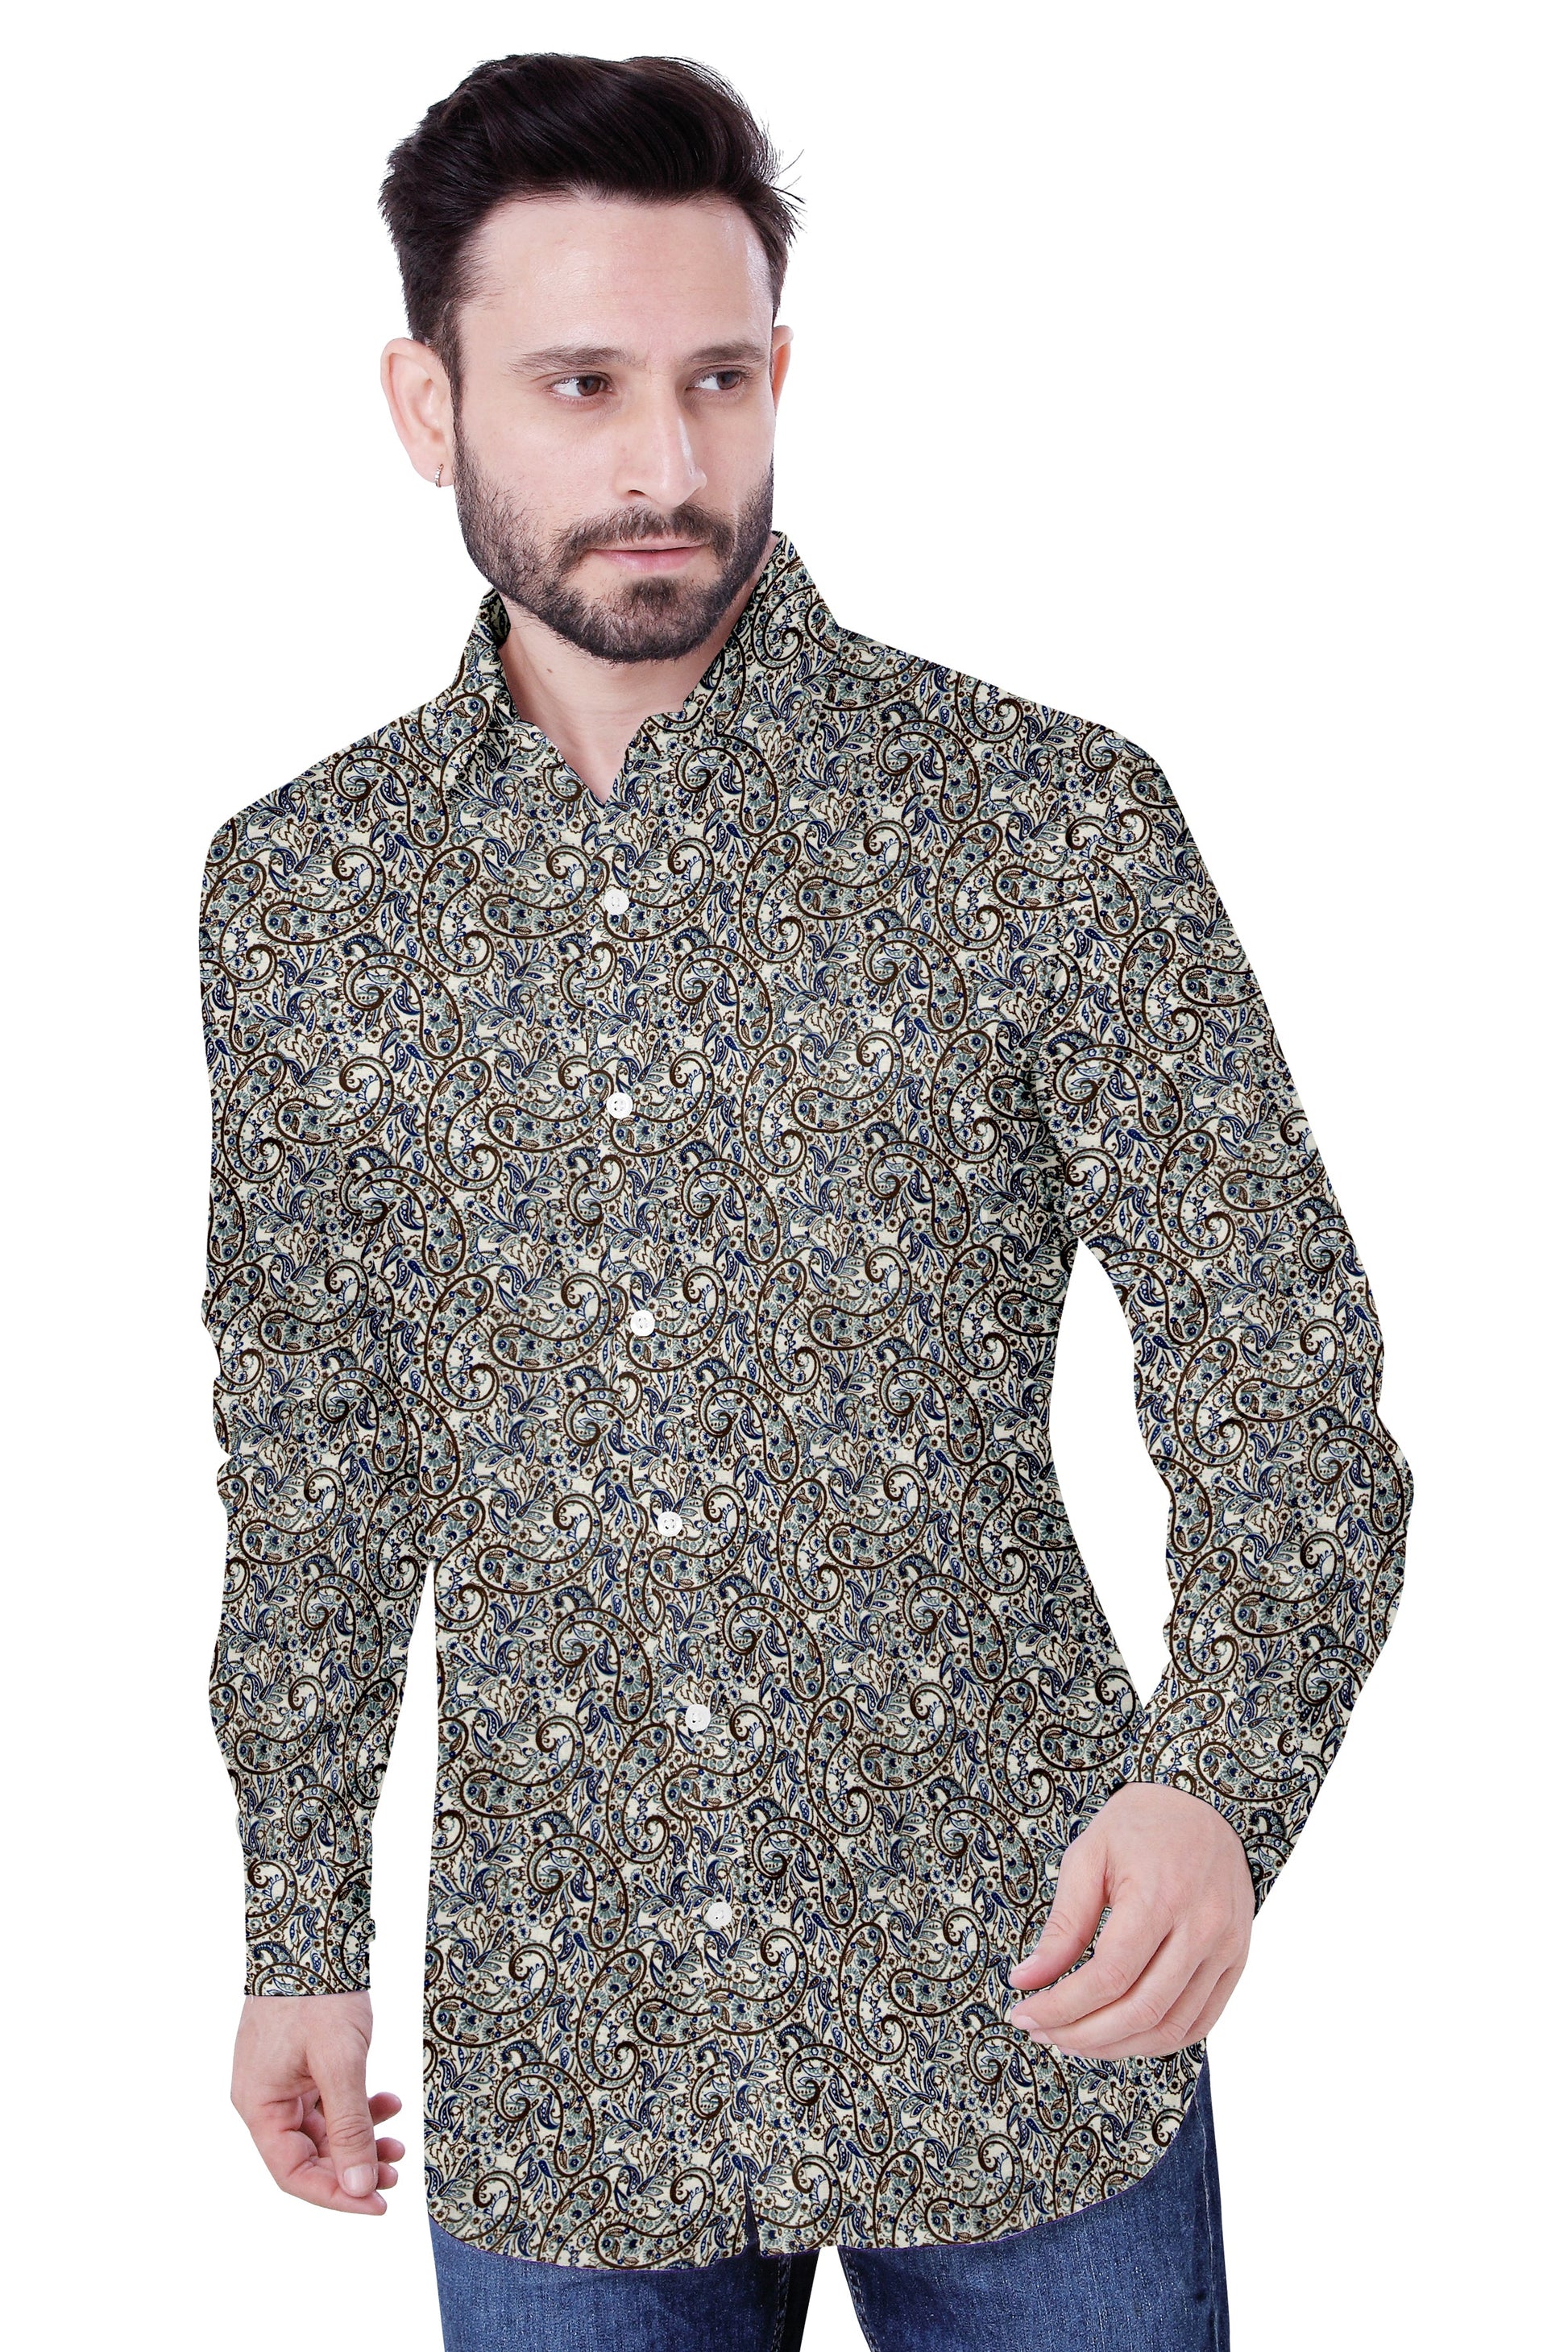 Men's Green Printed Casual Full Sleeves 100% Cotton 